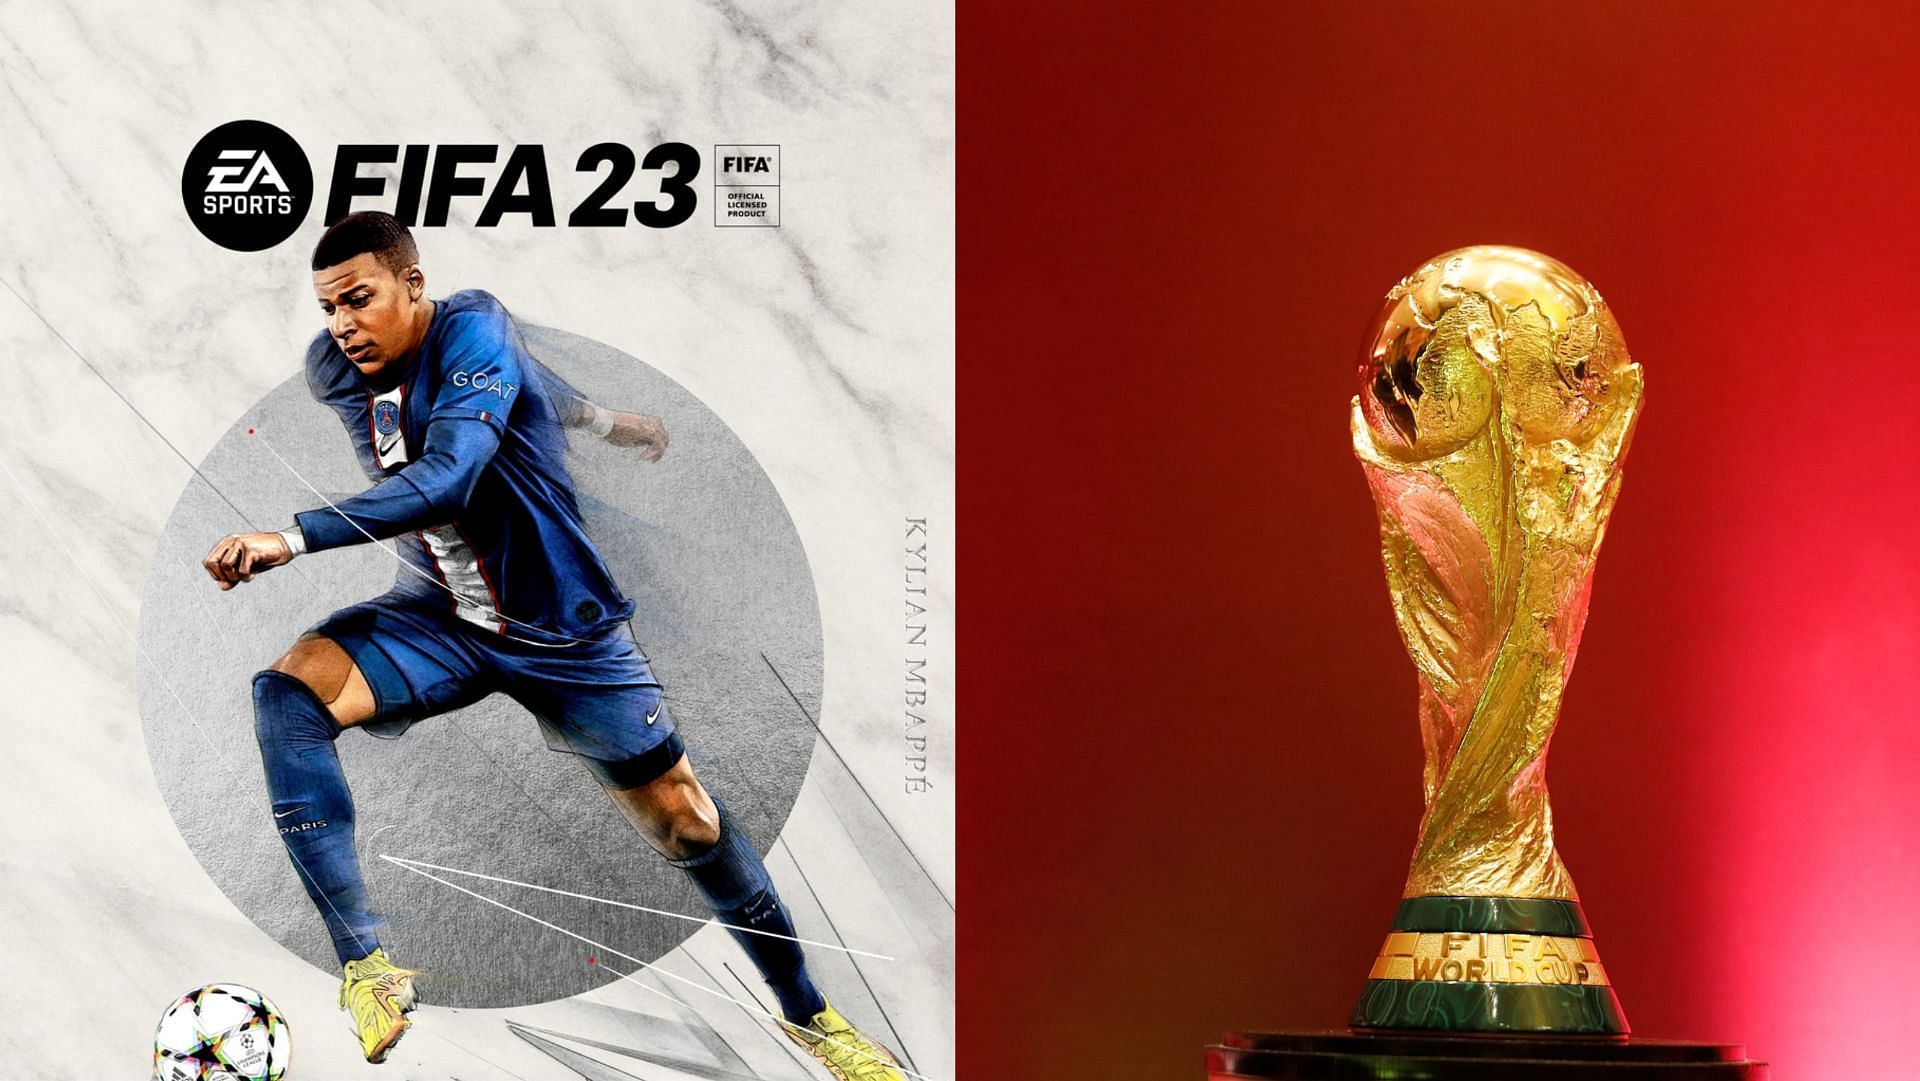 FIFA 23 will have new game modes to mark the occasion (Images via EA Sports, Olympics)